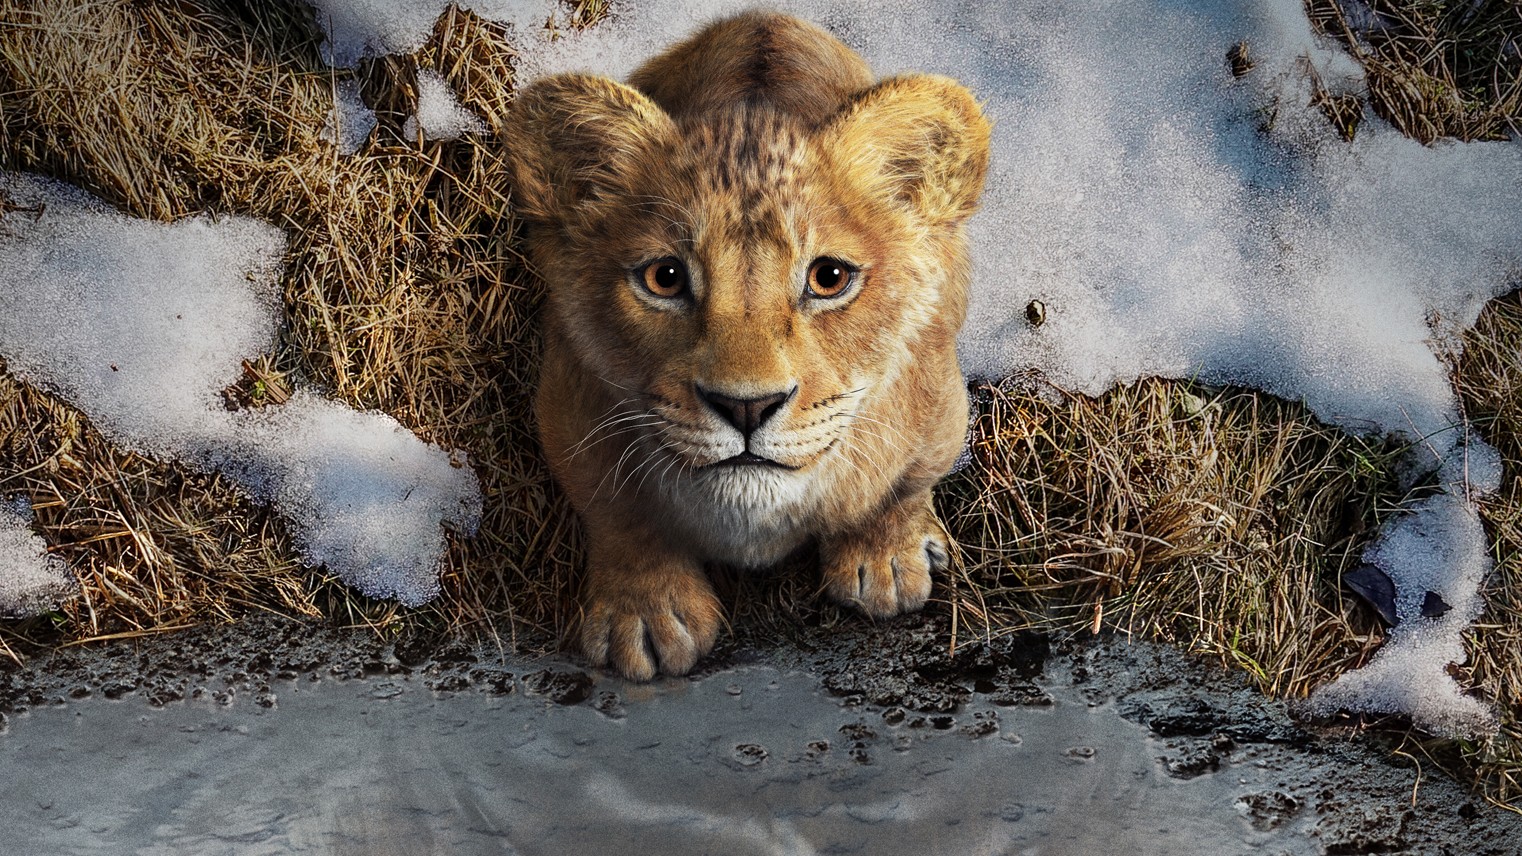 #FIRSTLOOK: “MUFASA: THE LION KING” IN THEATRES THIS DECEMBER